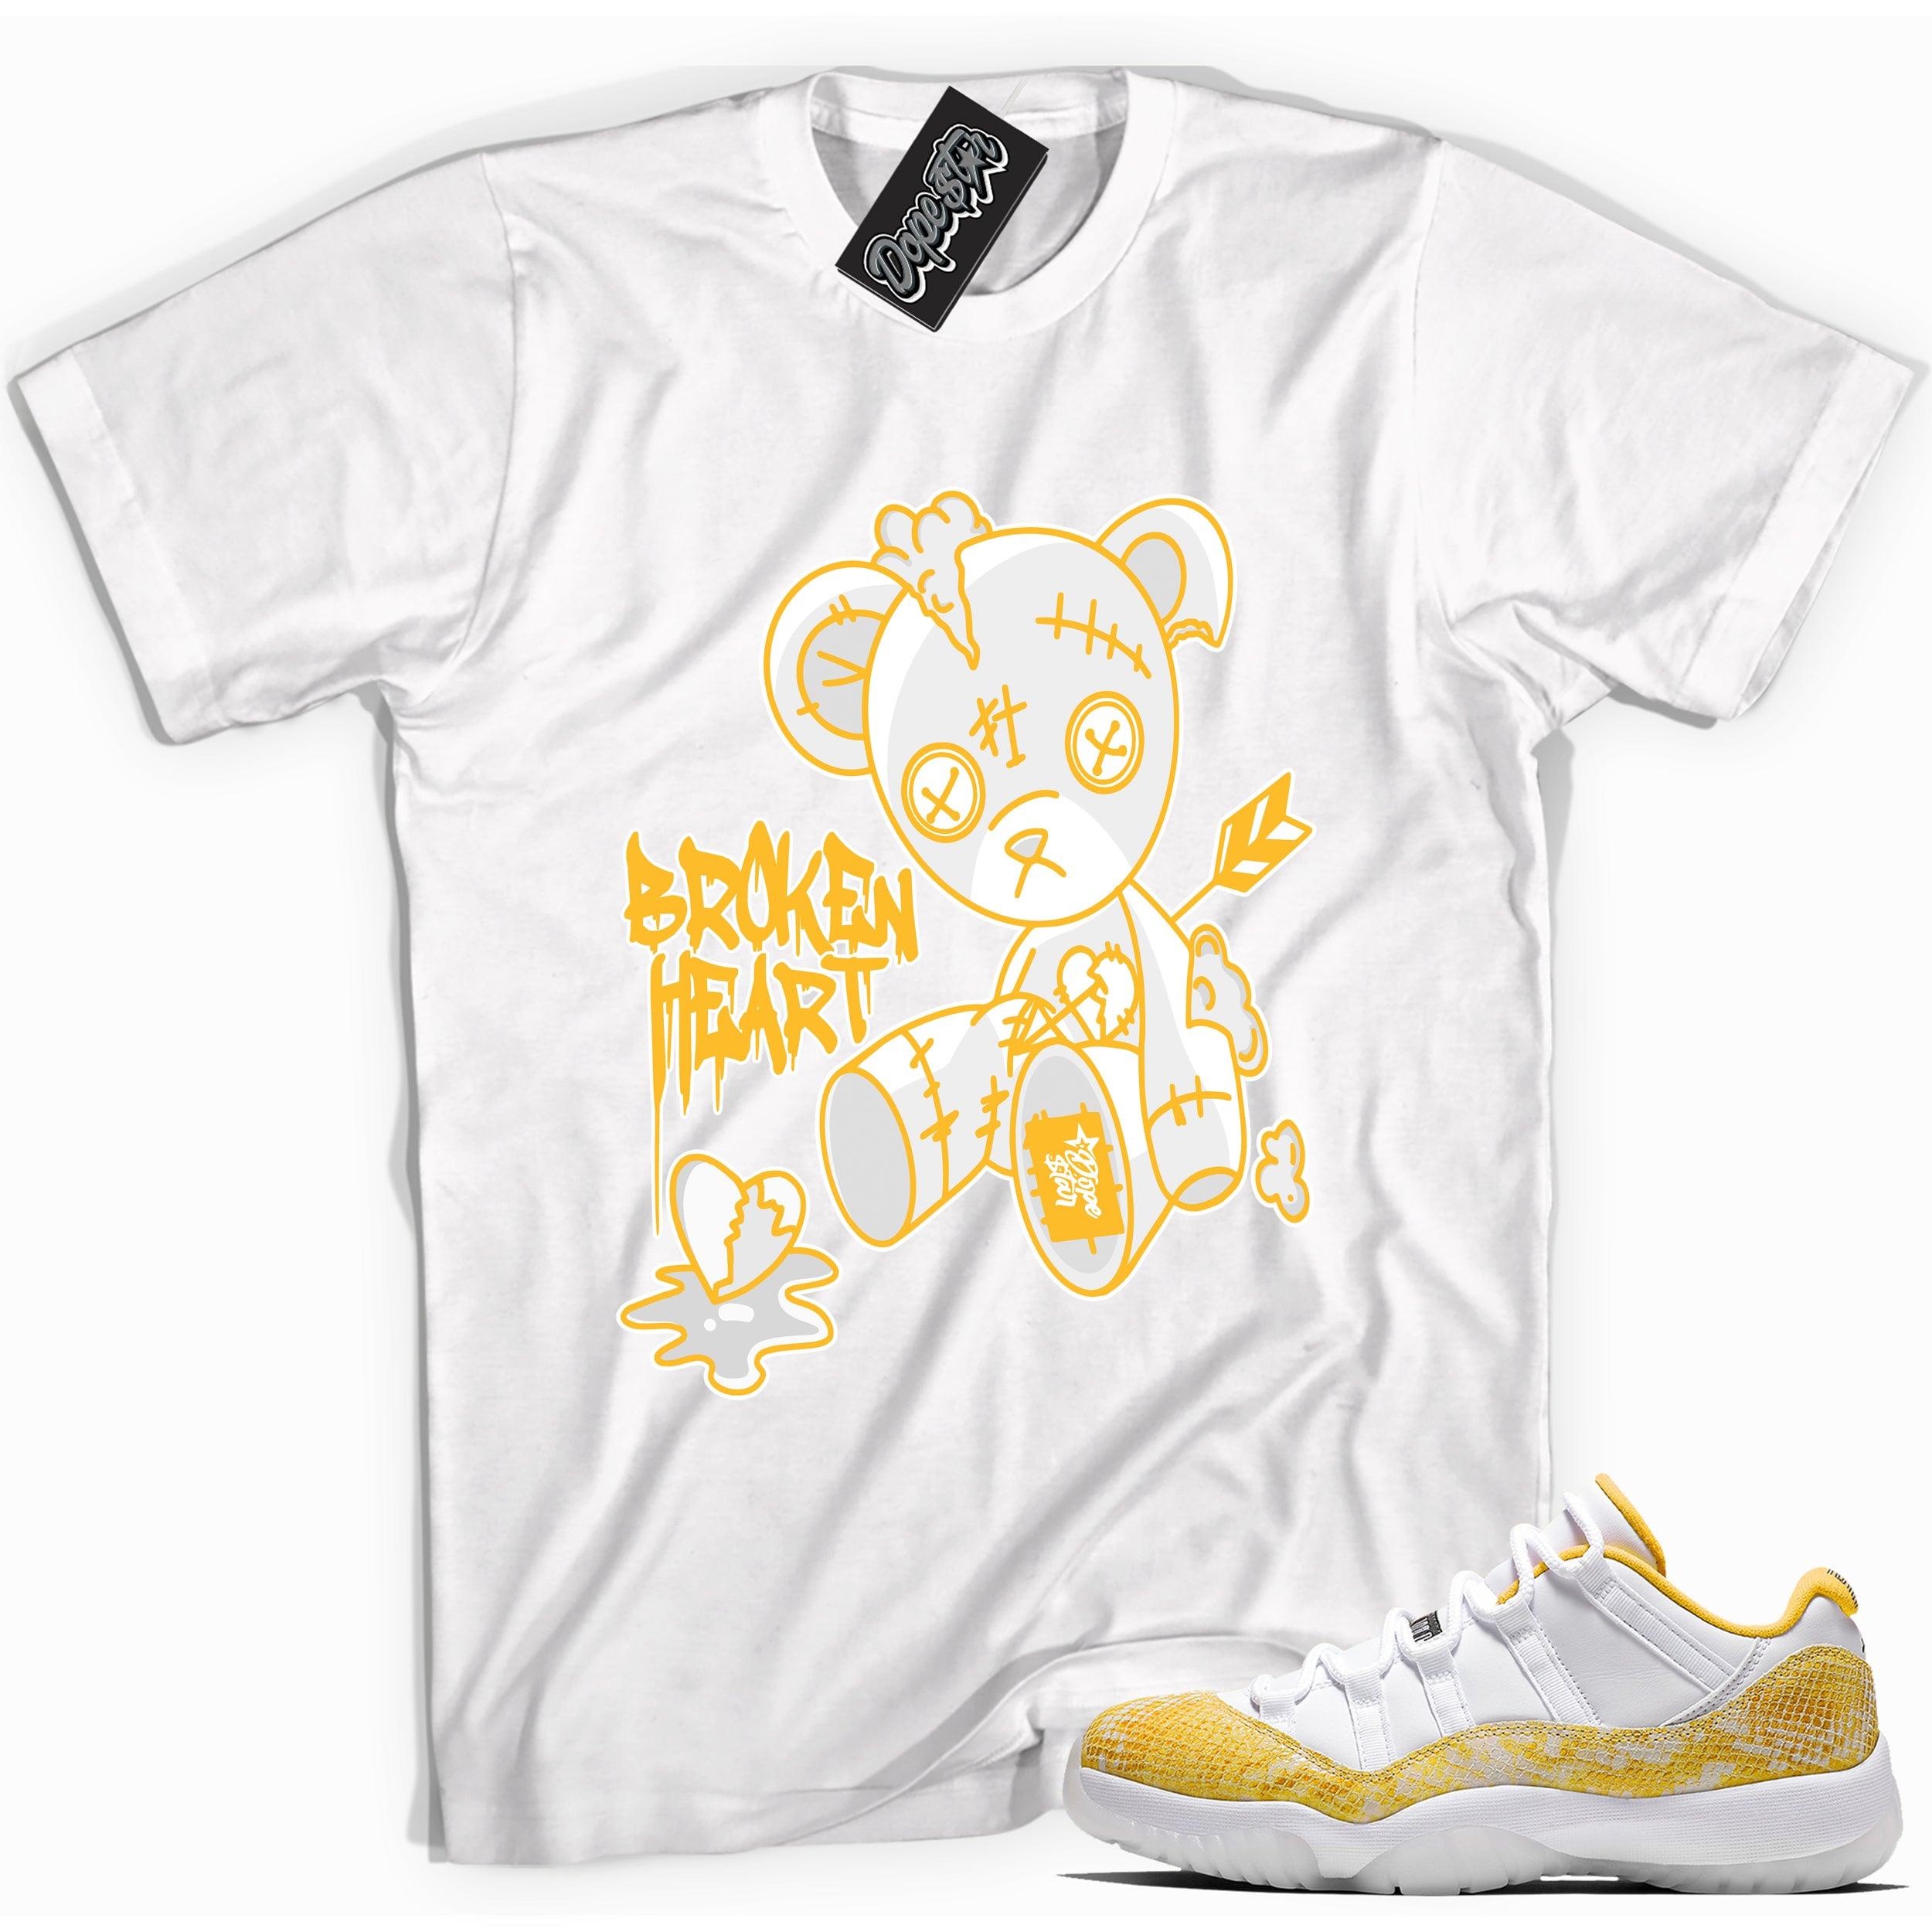 Cool white graphic tee with 'broken heart bear' print, that perfectly matches Air Jordan 11 Low Yellow Snakeskin sneakers